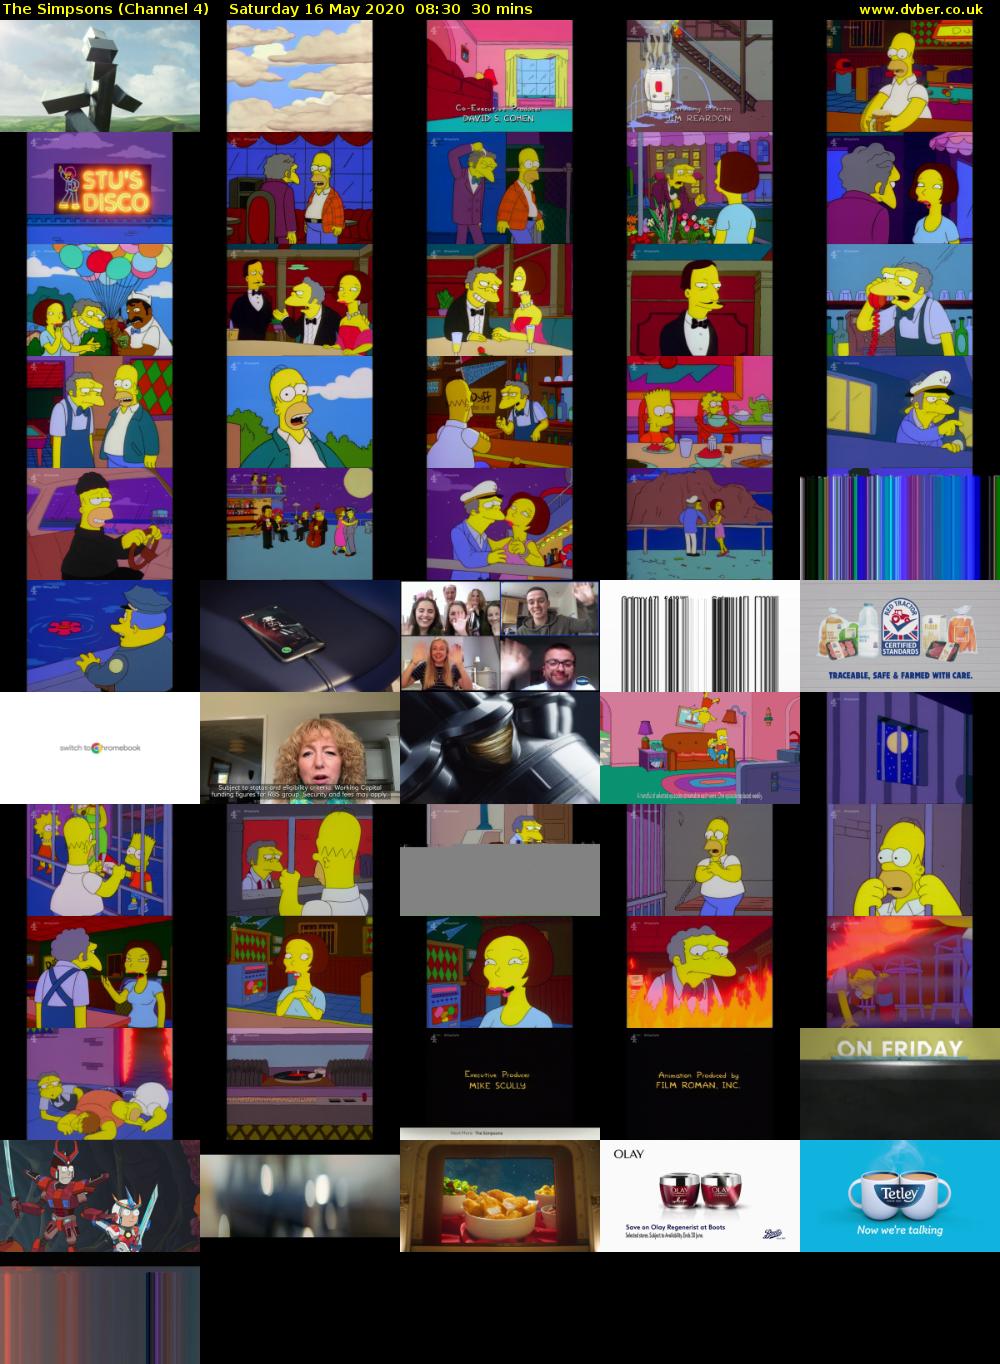 The Simpsons (Channel 4) Saturday 16 May 2020 08:30 - 09:00